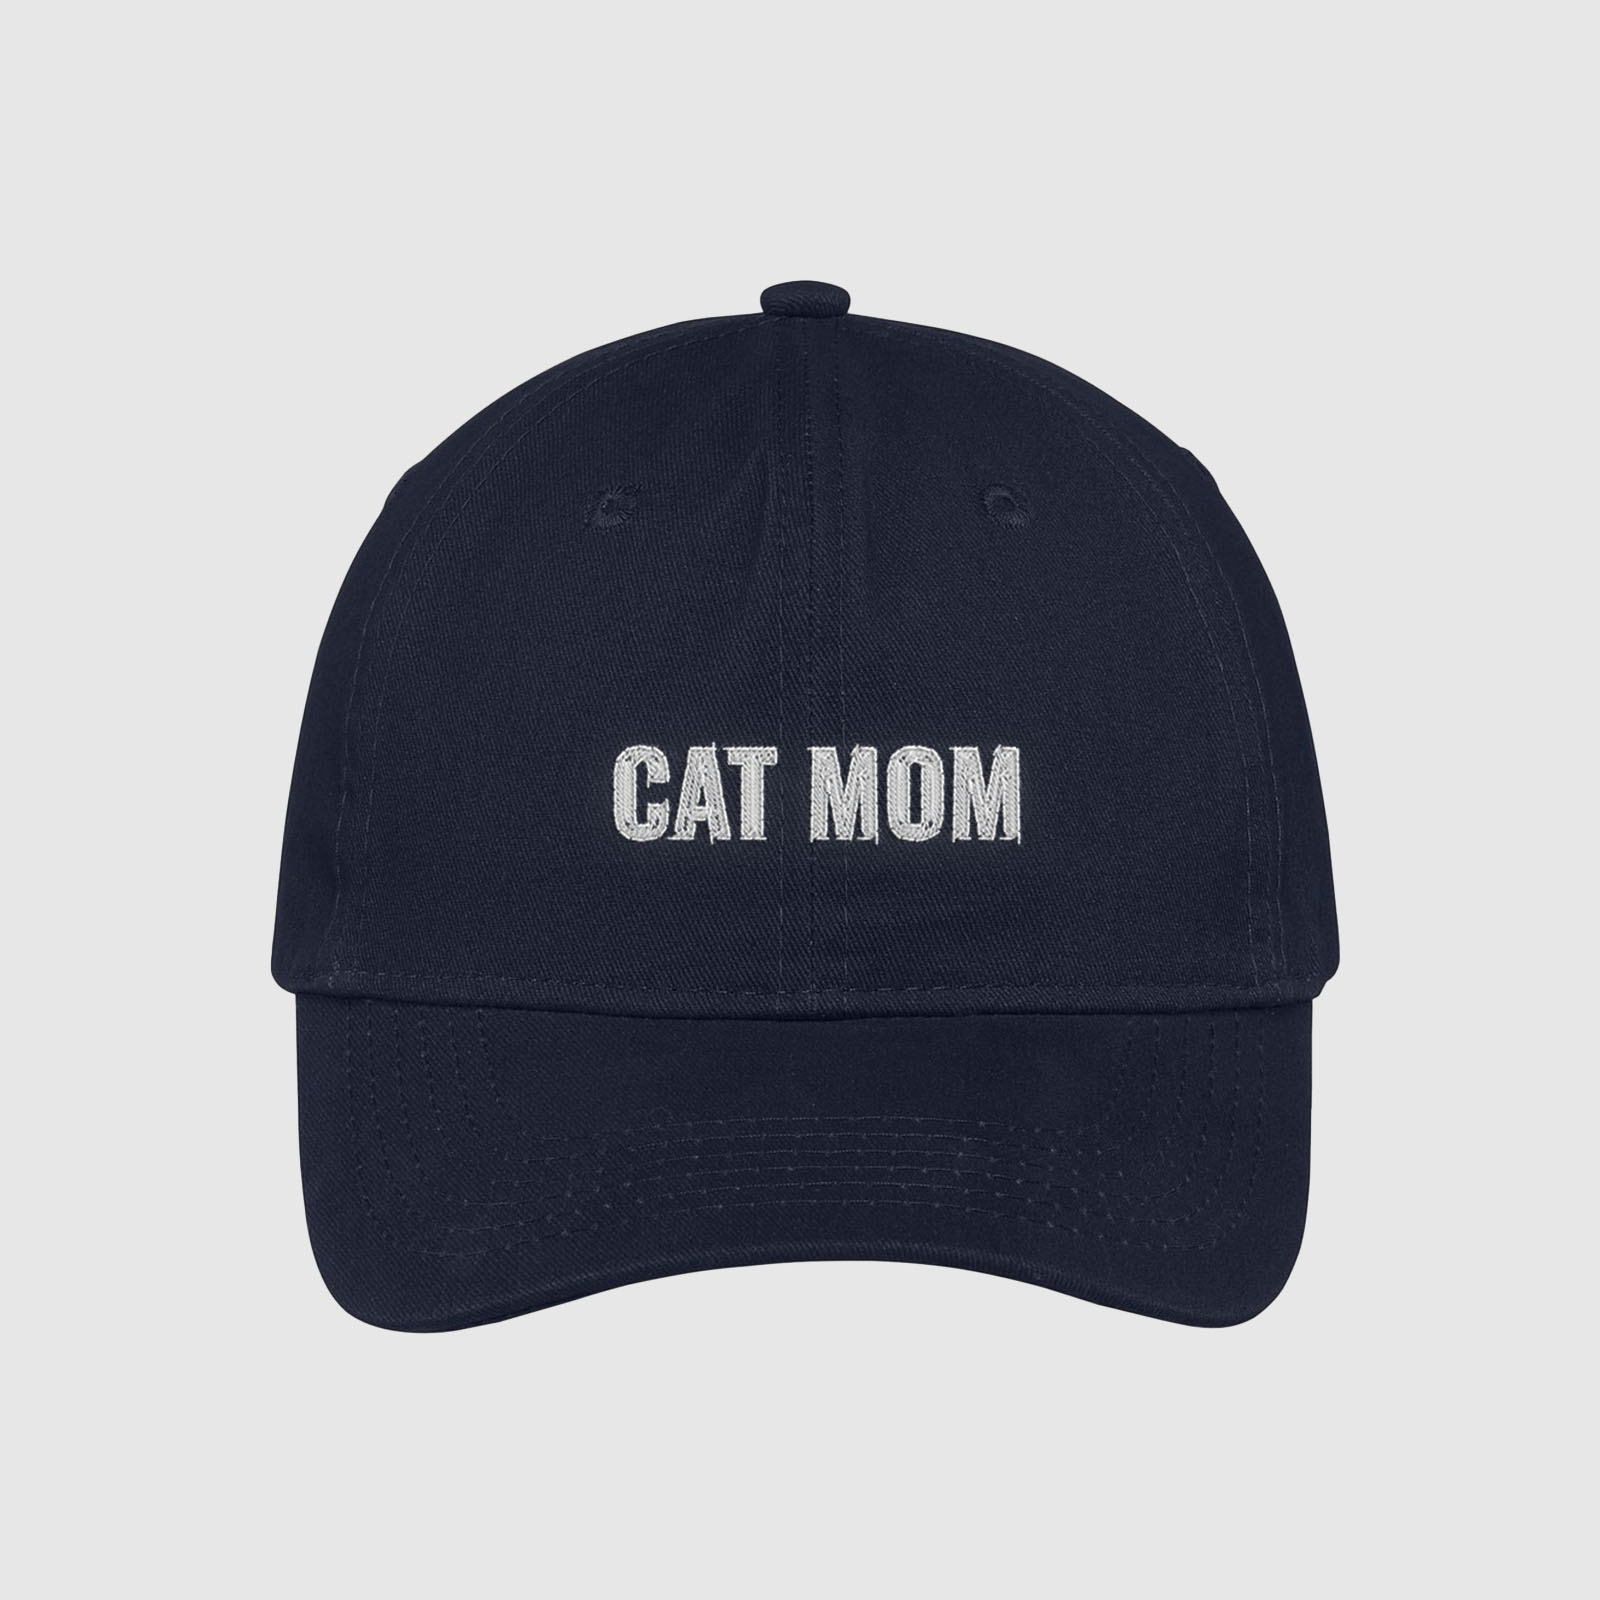 Navy Cat Mom dad Hat for cat moms embroidered with white text